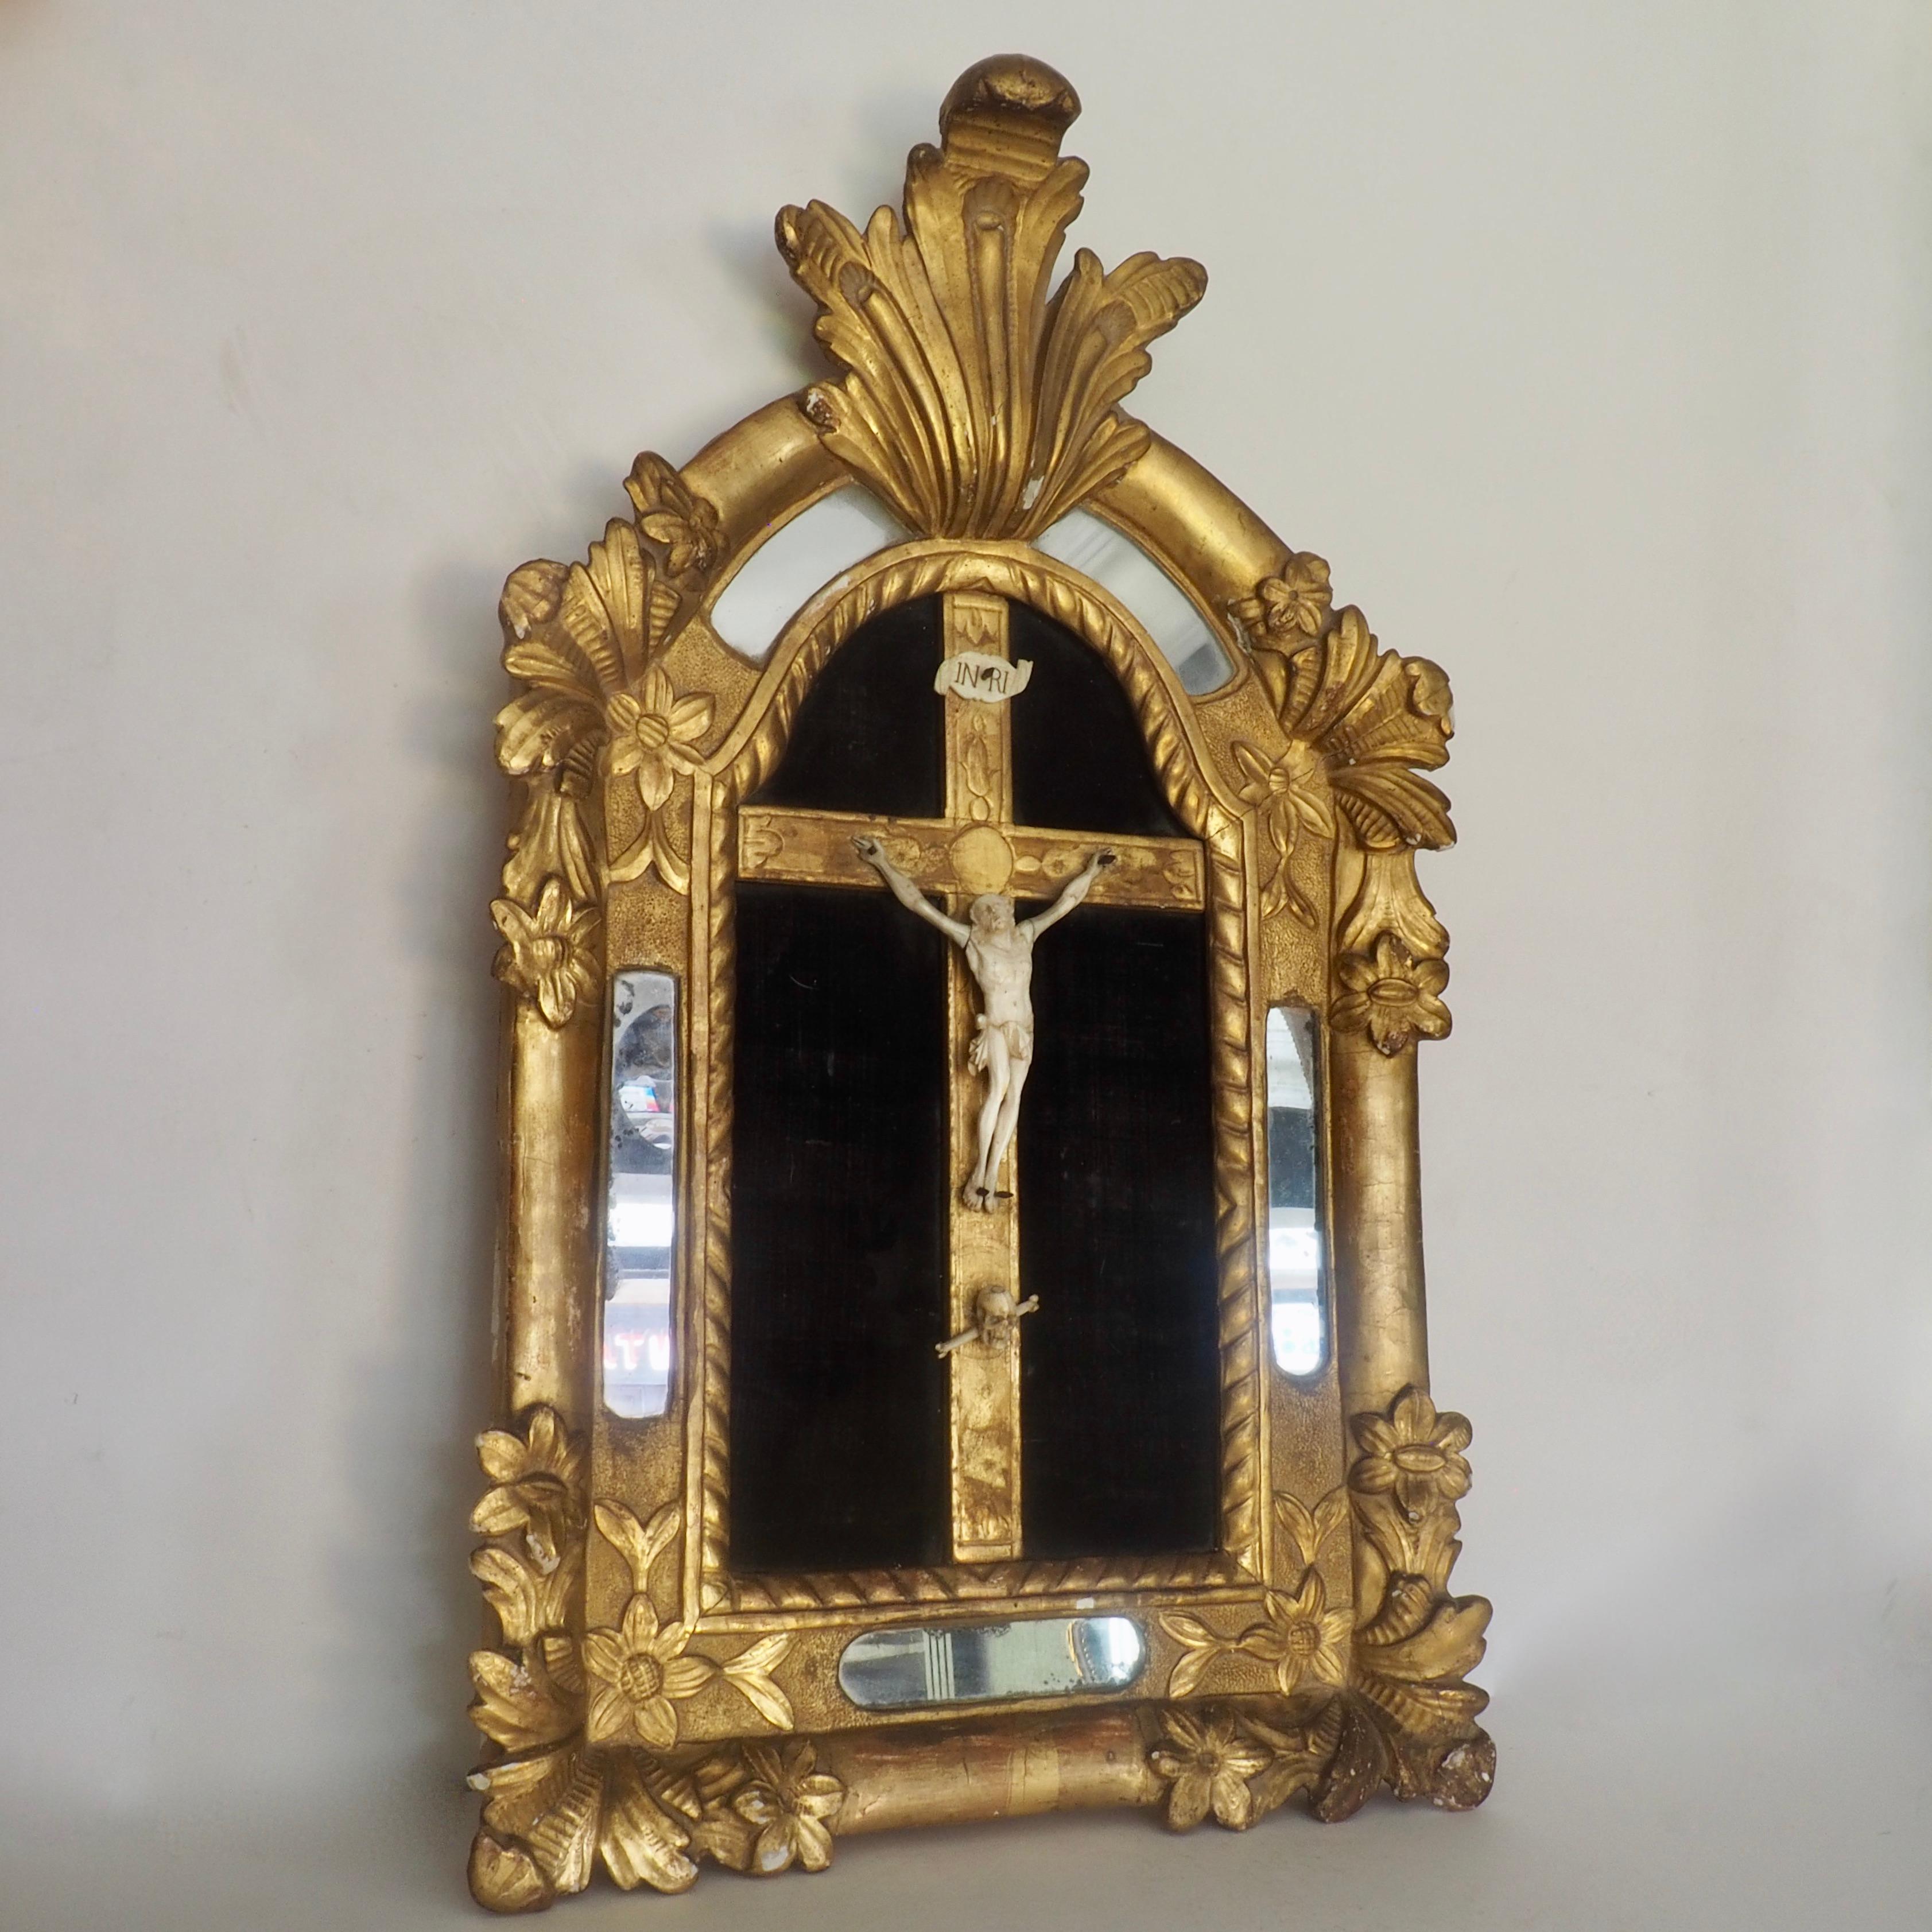 An early 18th century crucifix cushion mirror in the late baroque manner. Magnificently carved in giltwood and bone; the mirror depicts Christ on the cross laid onto black velvet, decorated with a deaths head device and surrounded by a giltwood